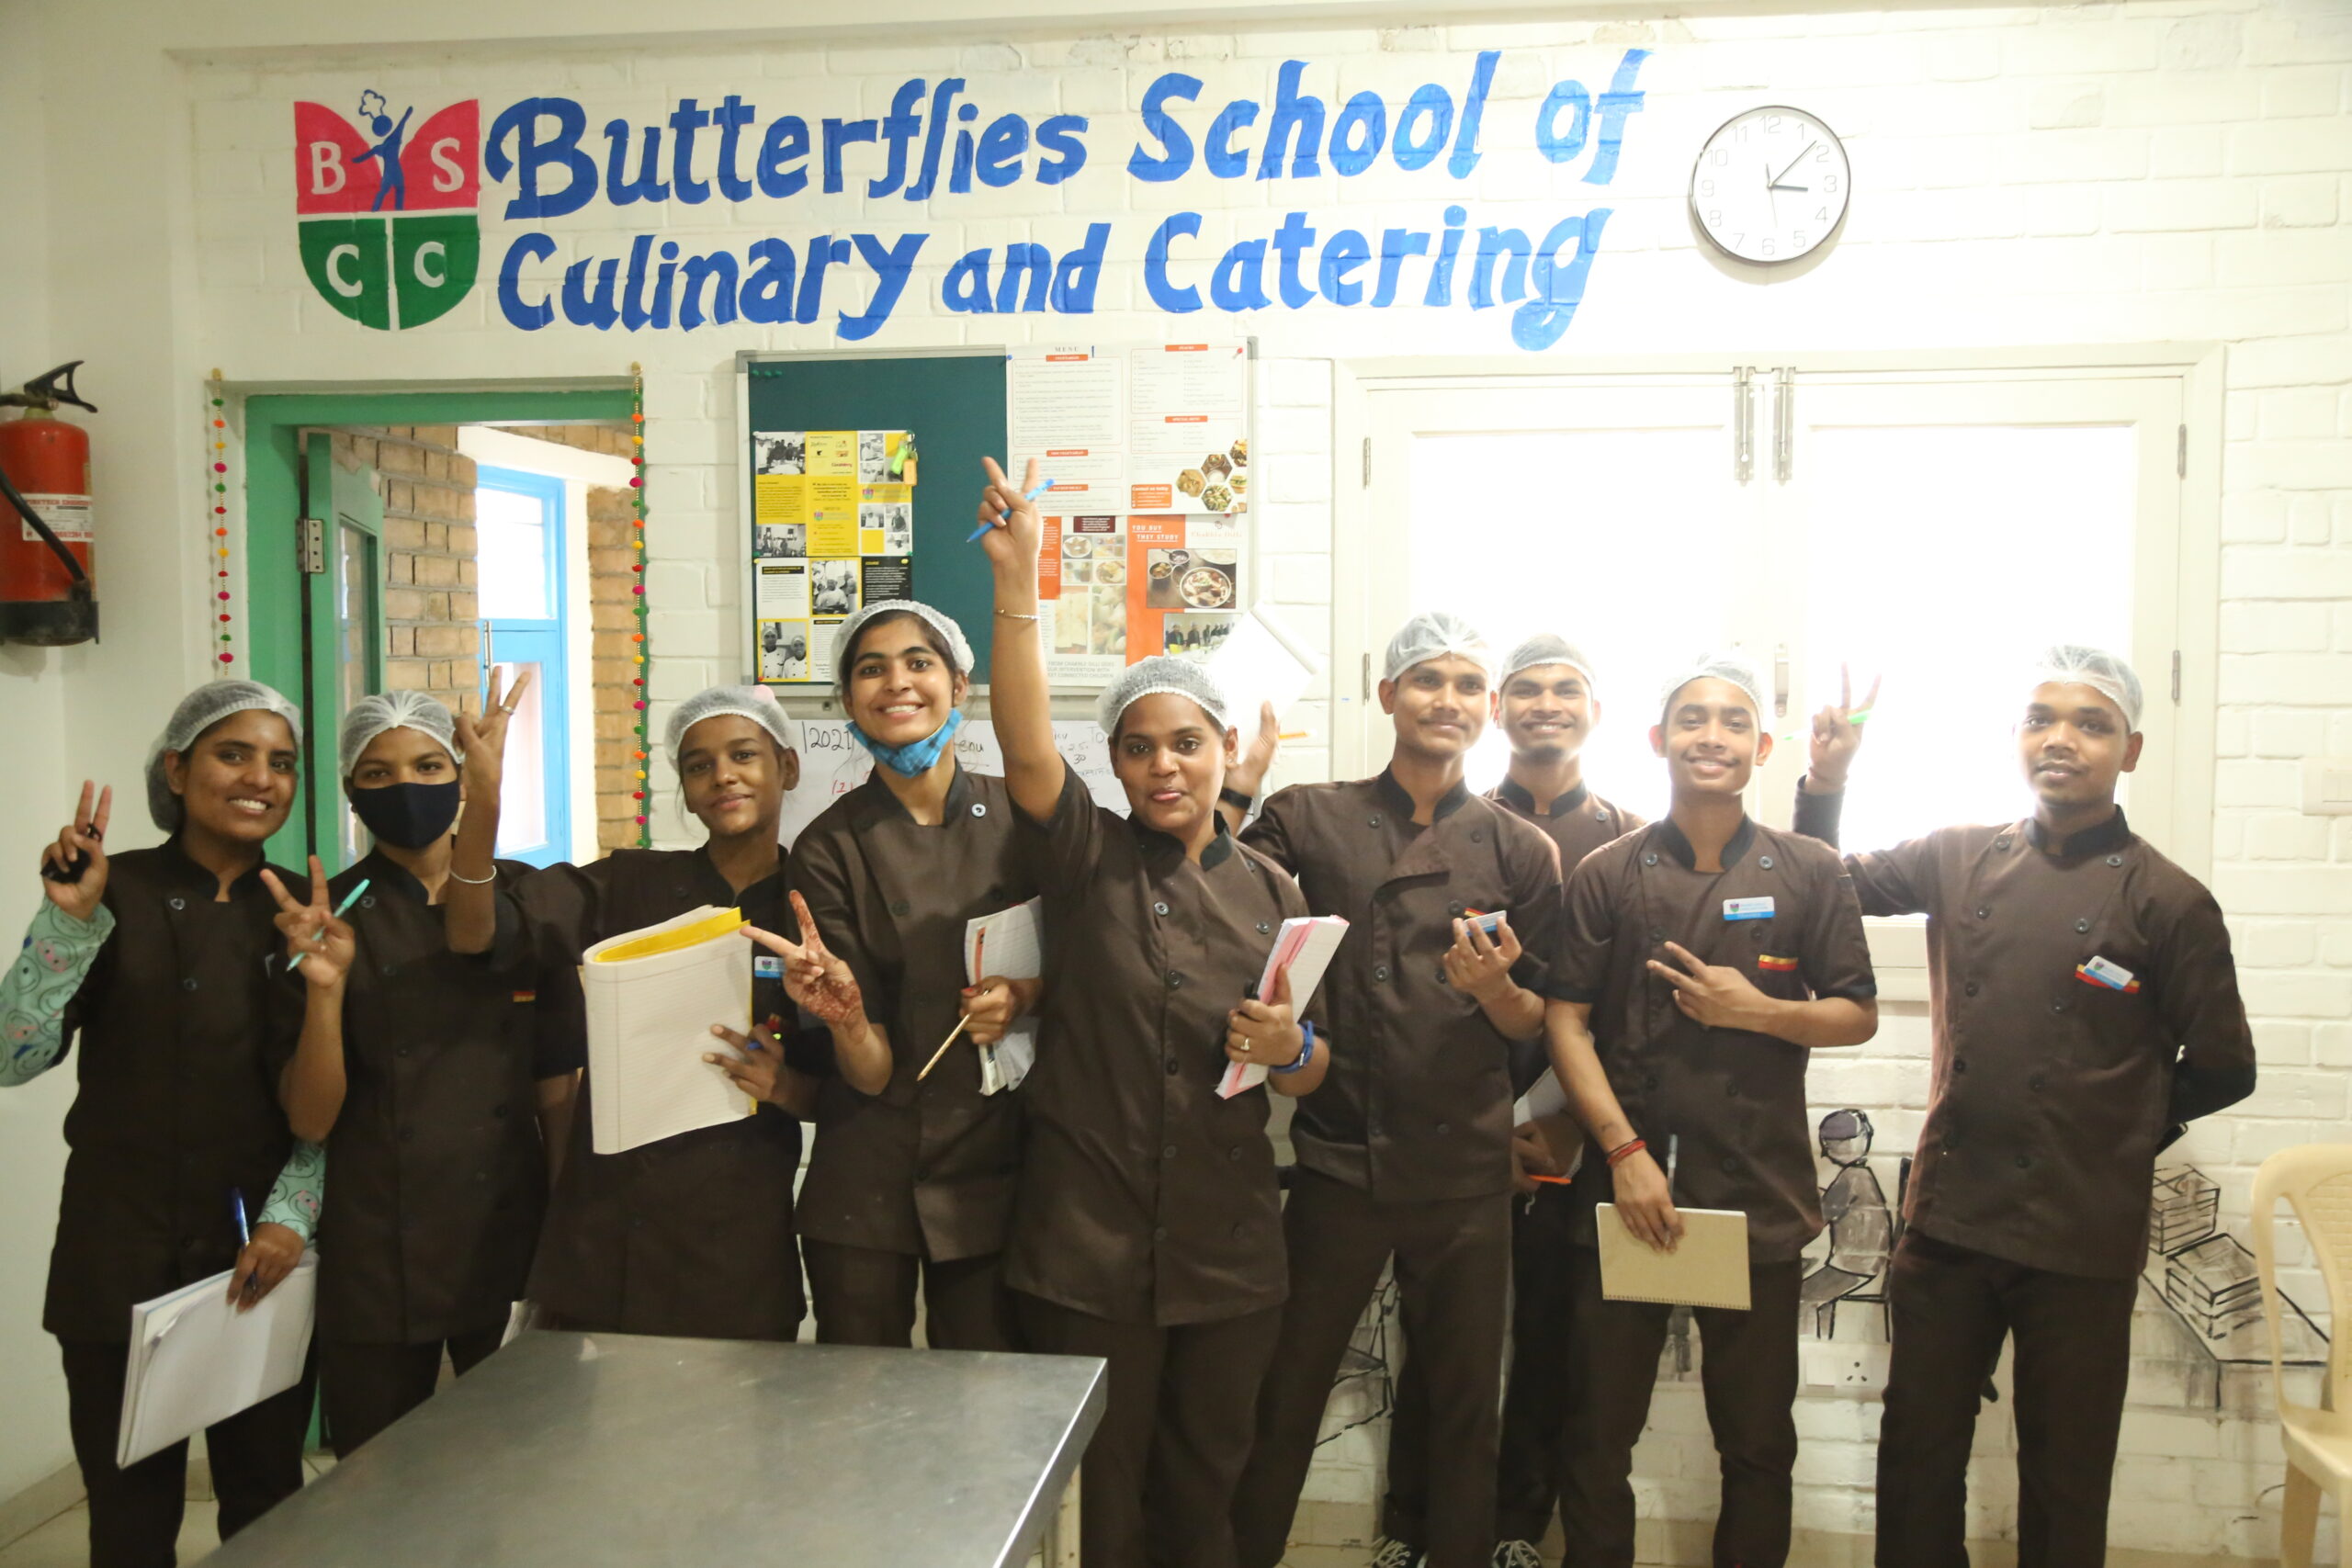 Butterflies School of Culinary & Catering